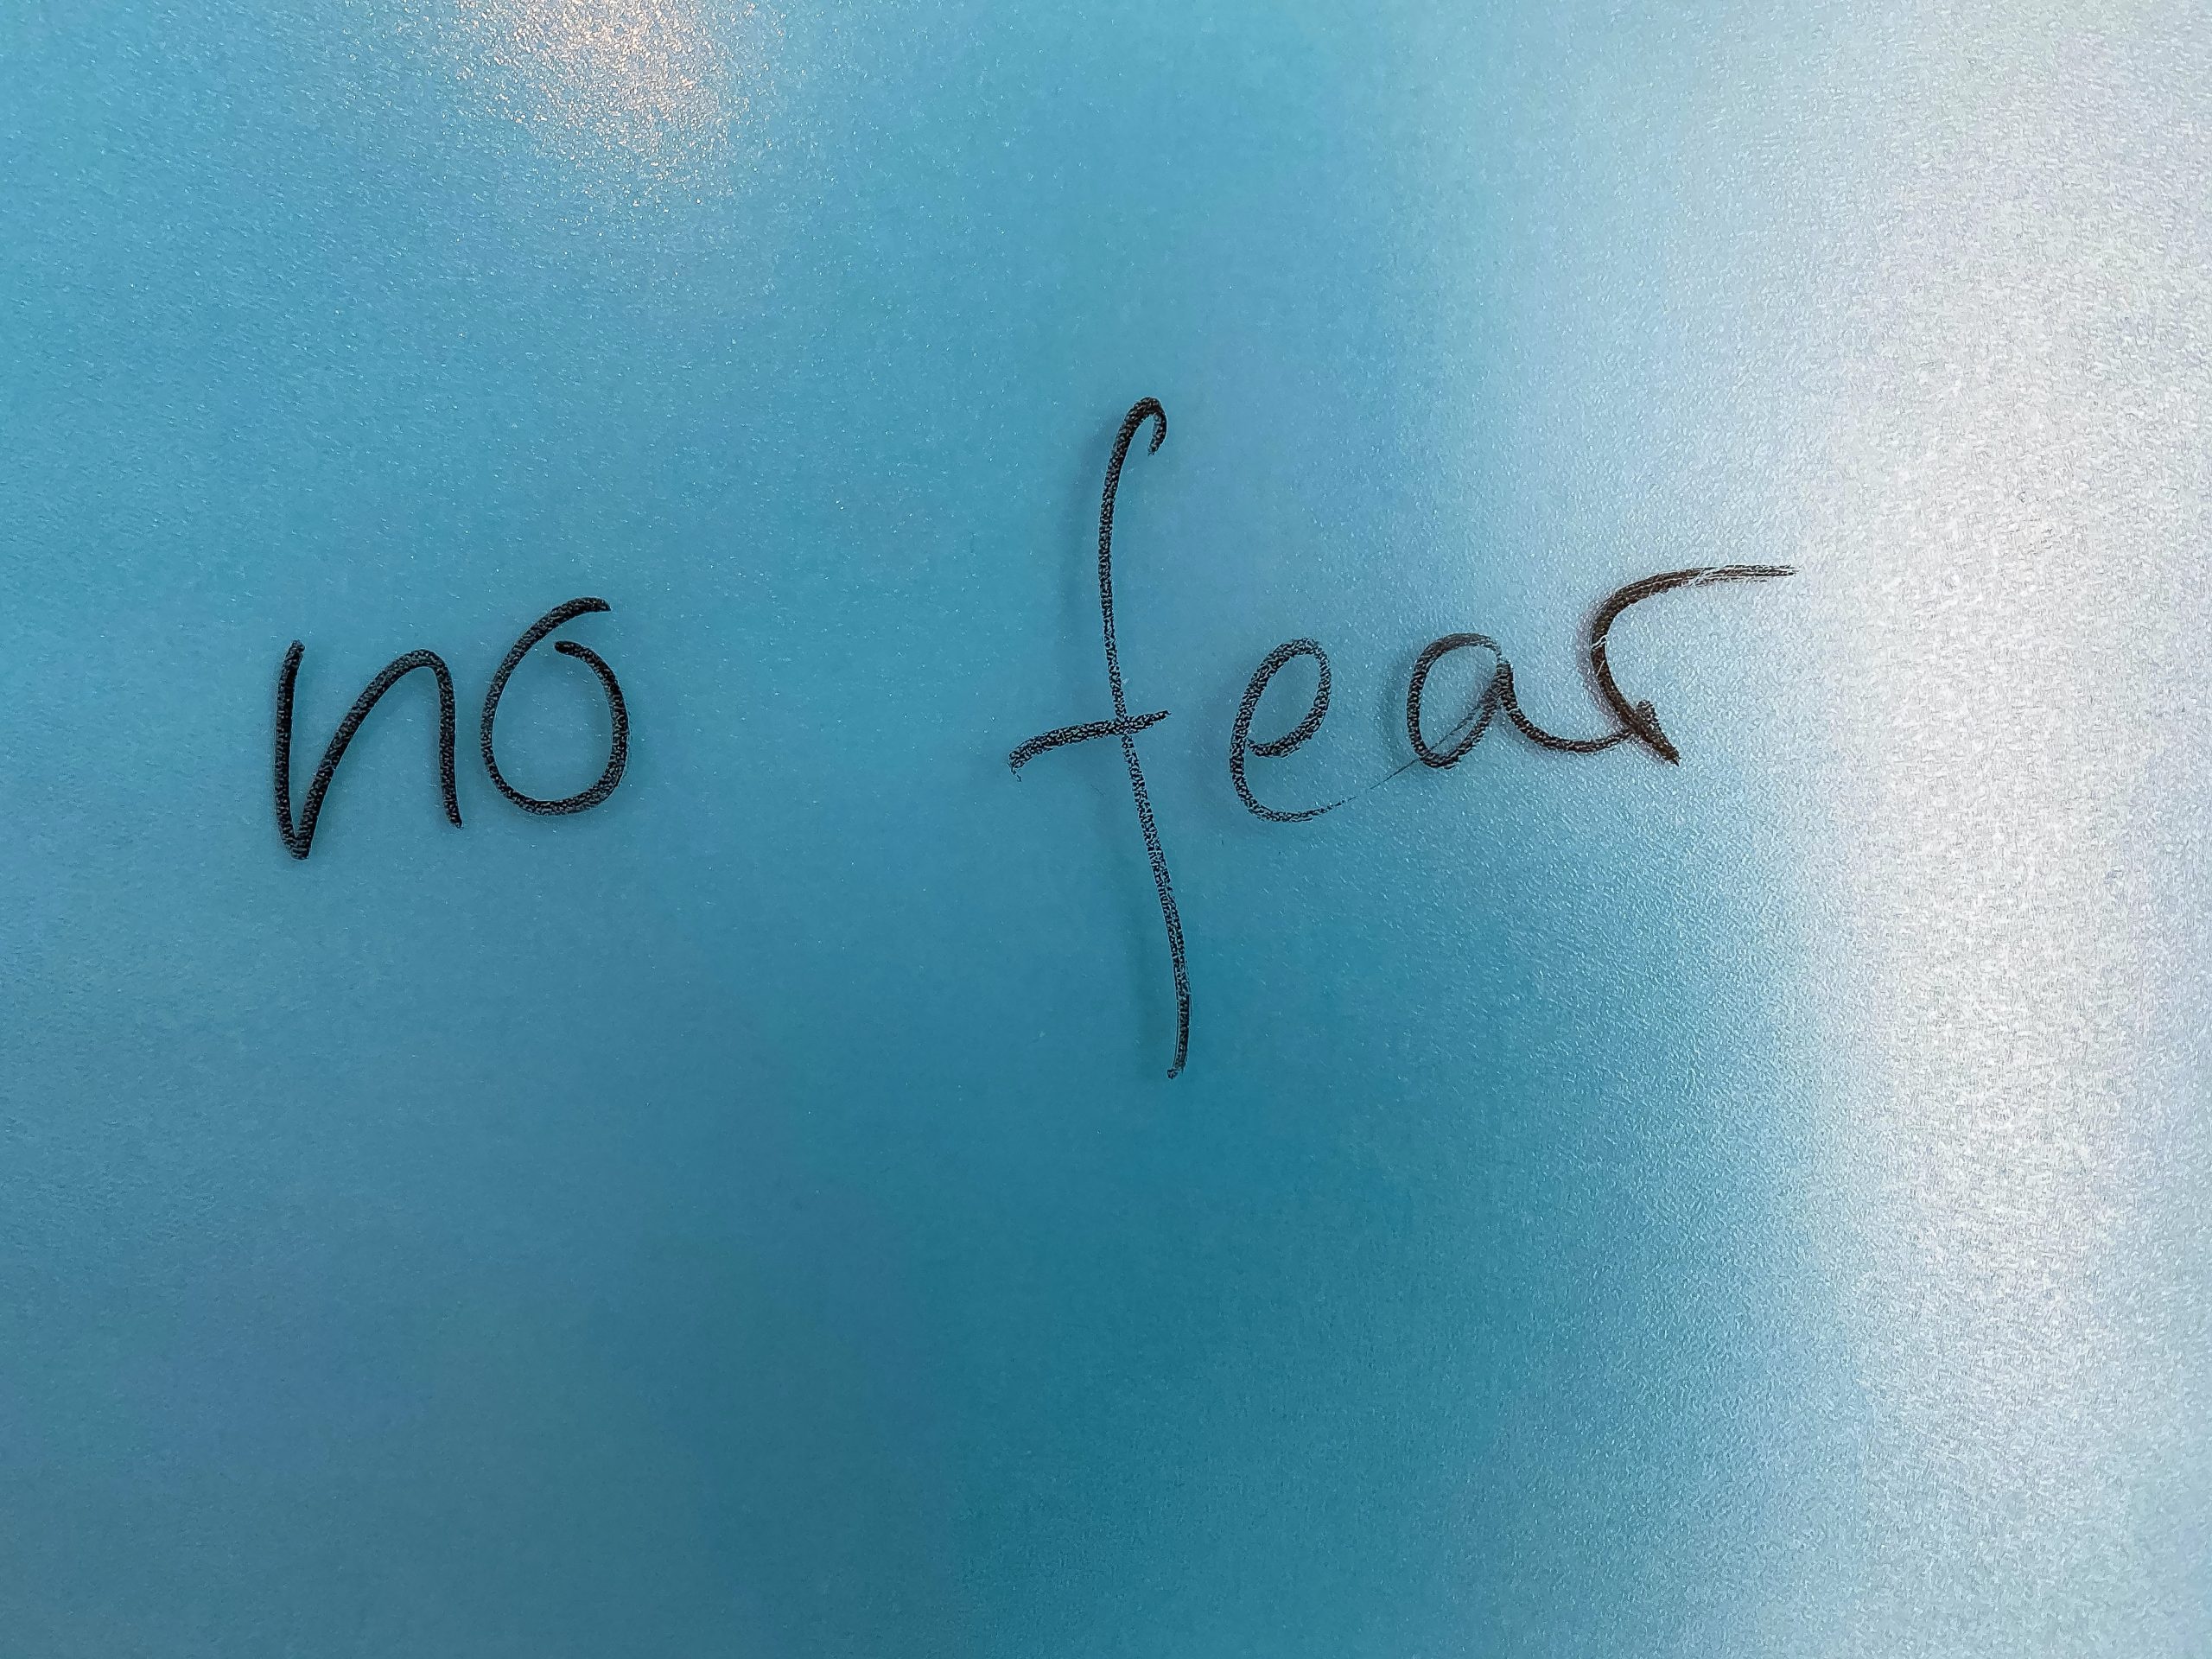 Facing Your Fears – March 26, 2021 – Morning Workshop